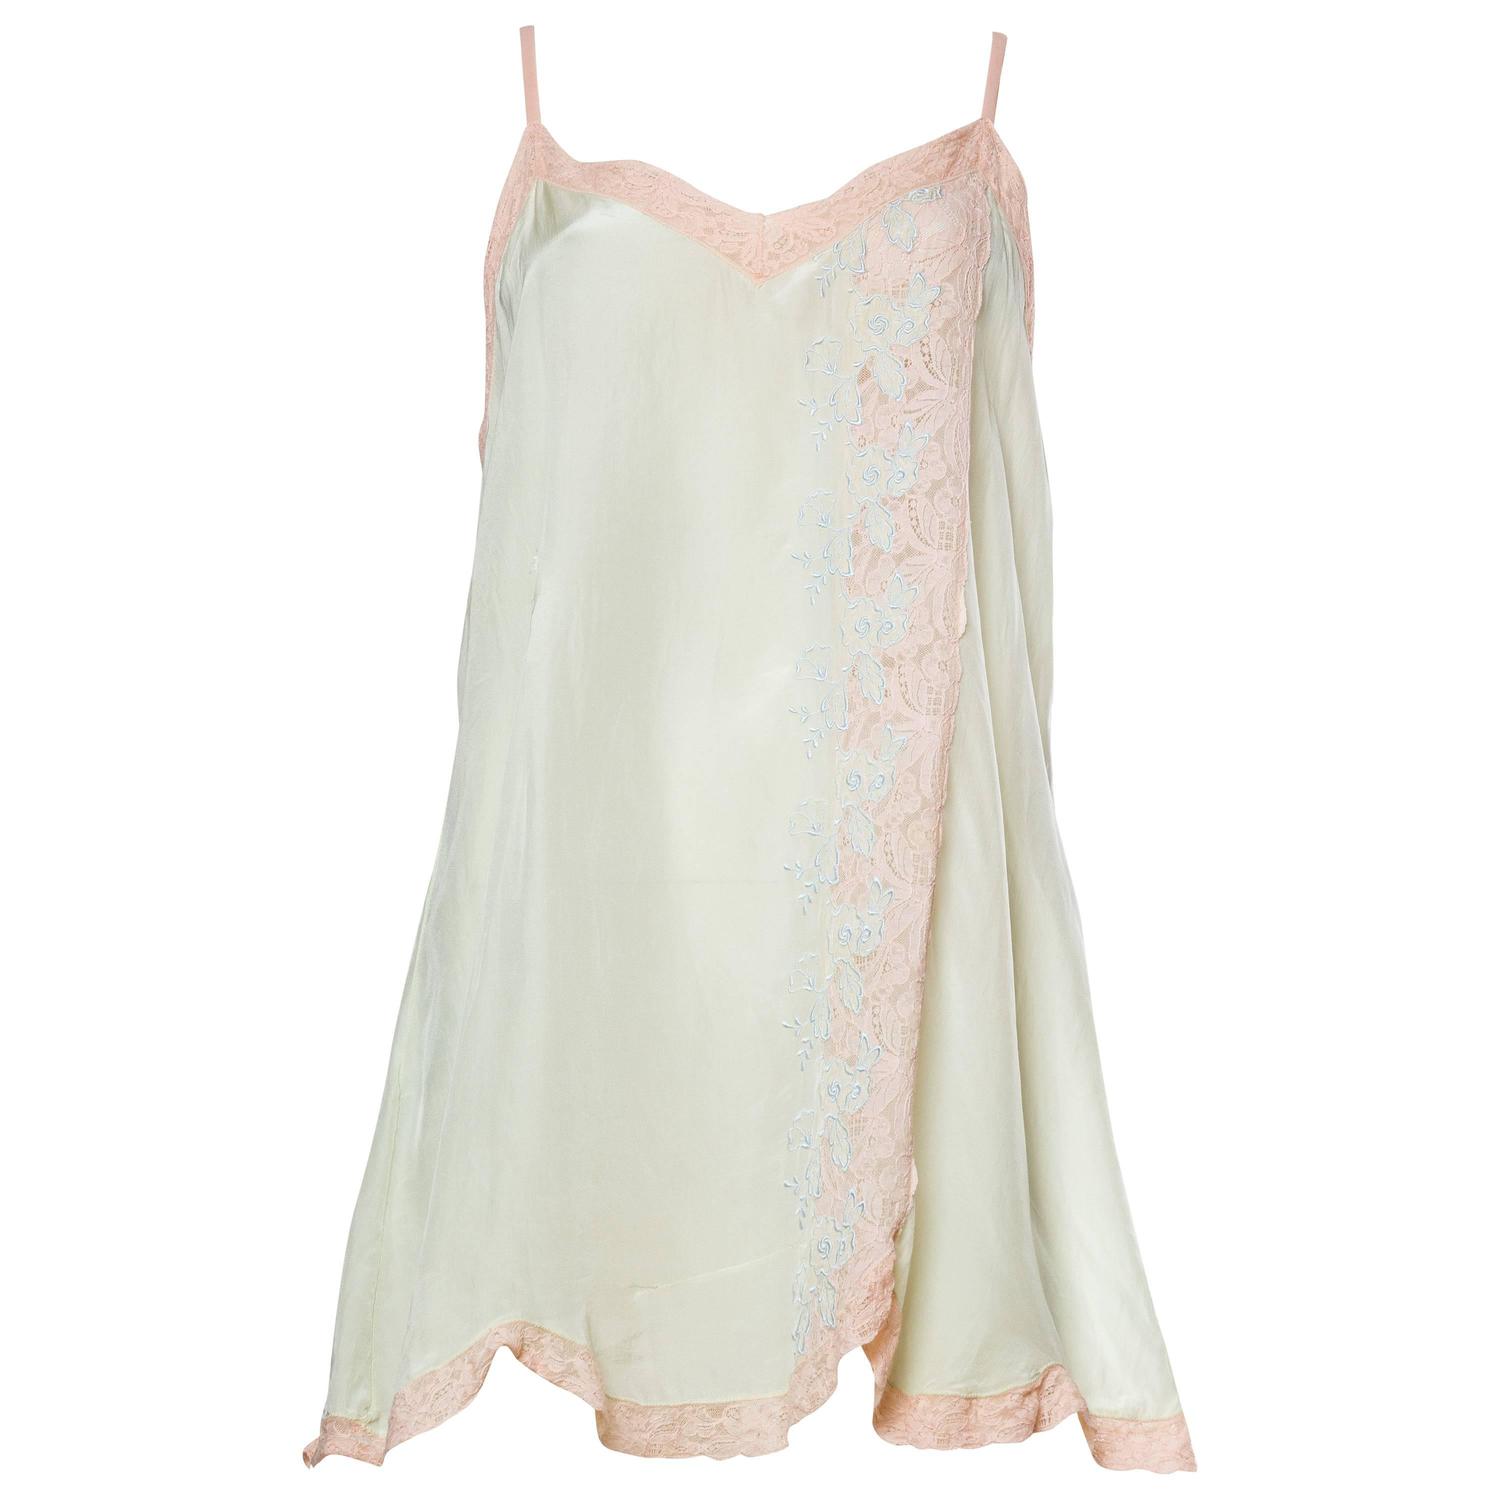 1920s Silk Negligee Slip Dress For Sale at 1stdibs